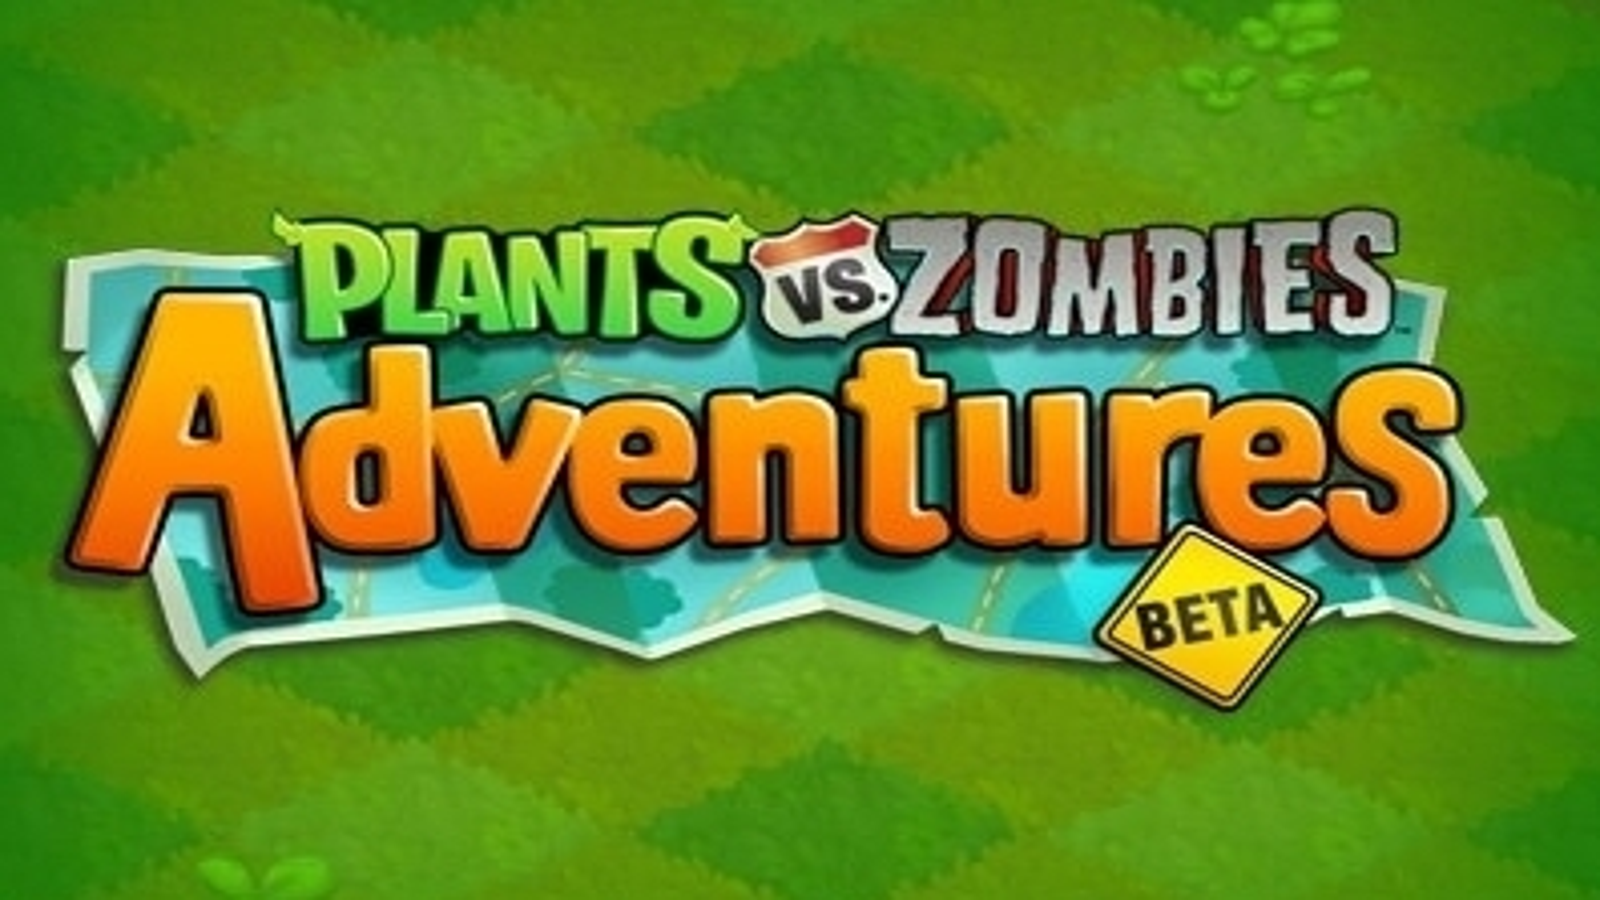 Chinese firm to adapt Plants vs. Zombies into a movie